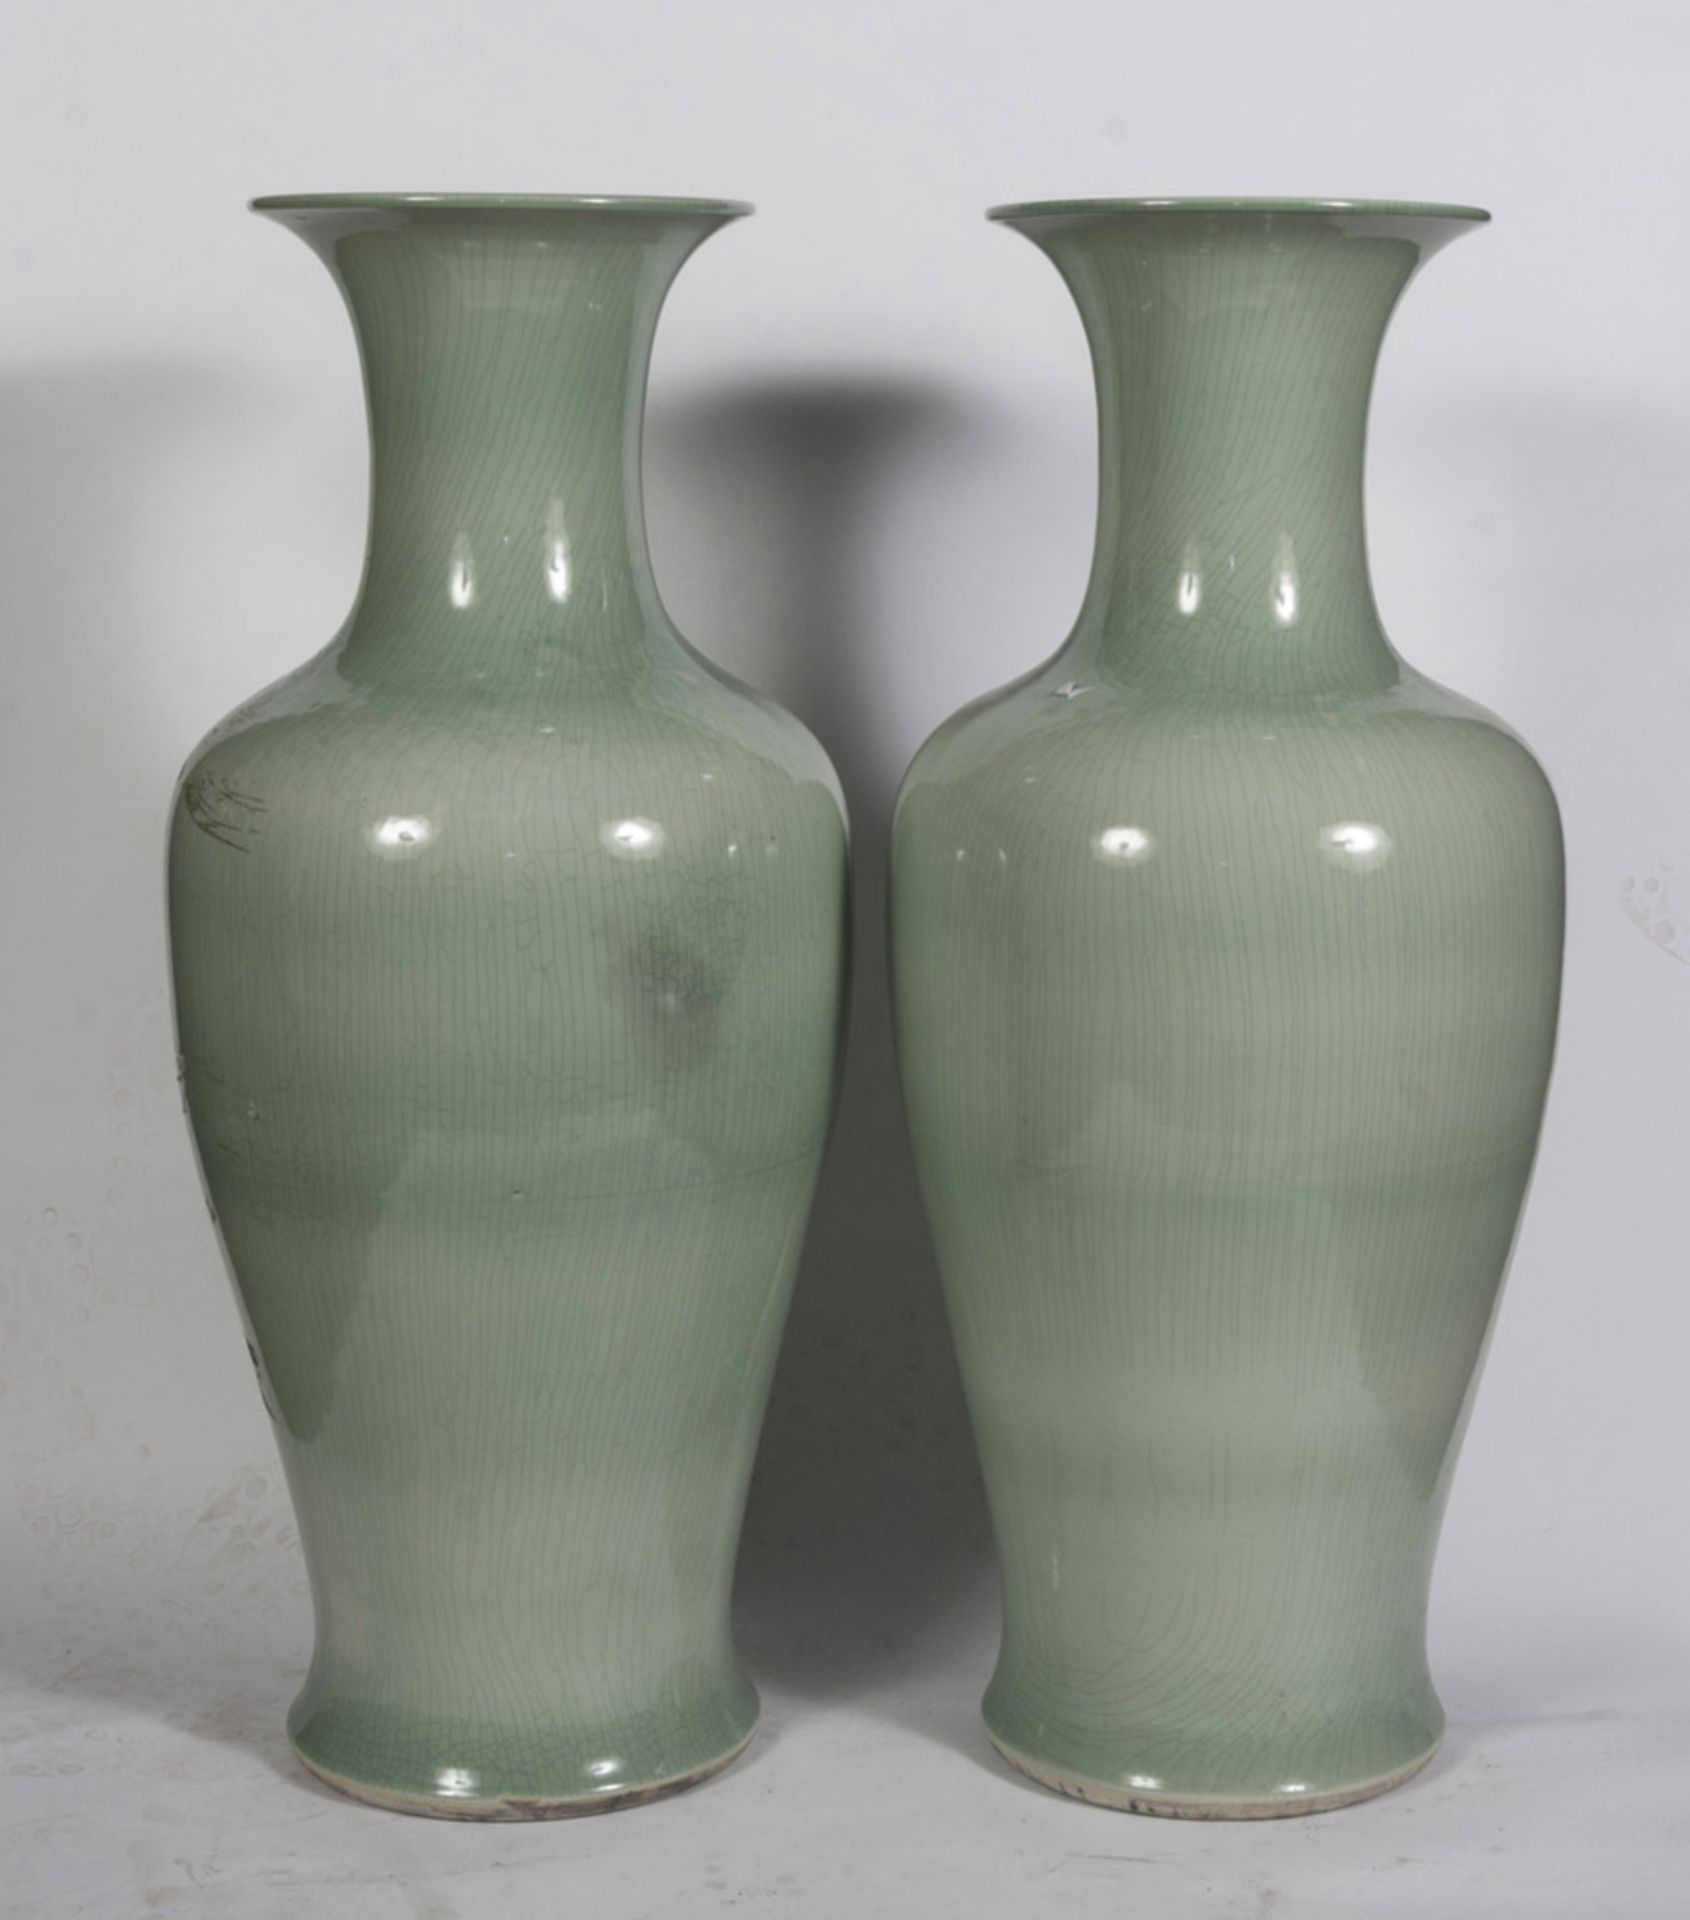 A PAIR OF LARGE VASES, CHINA, 20TH CENTURY